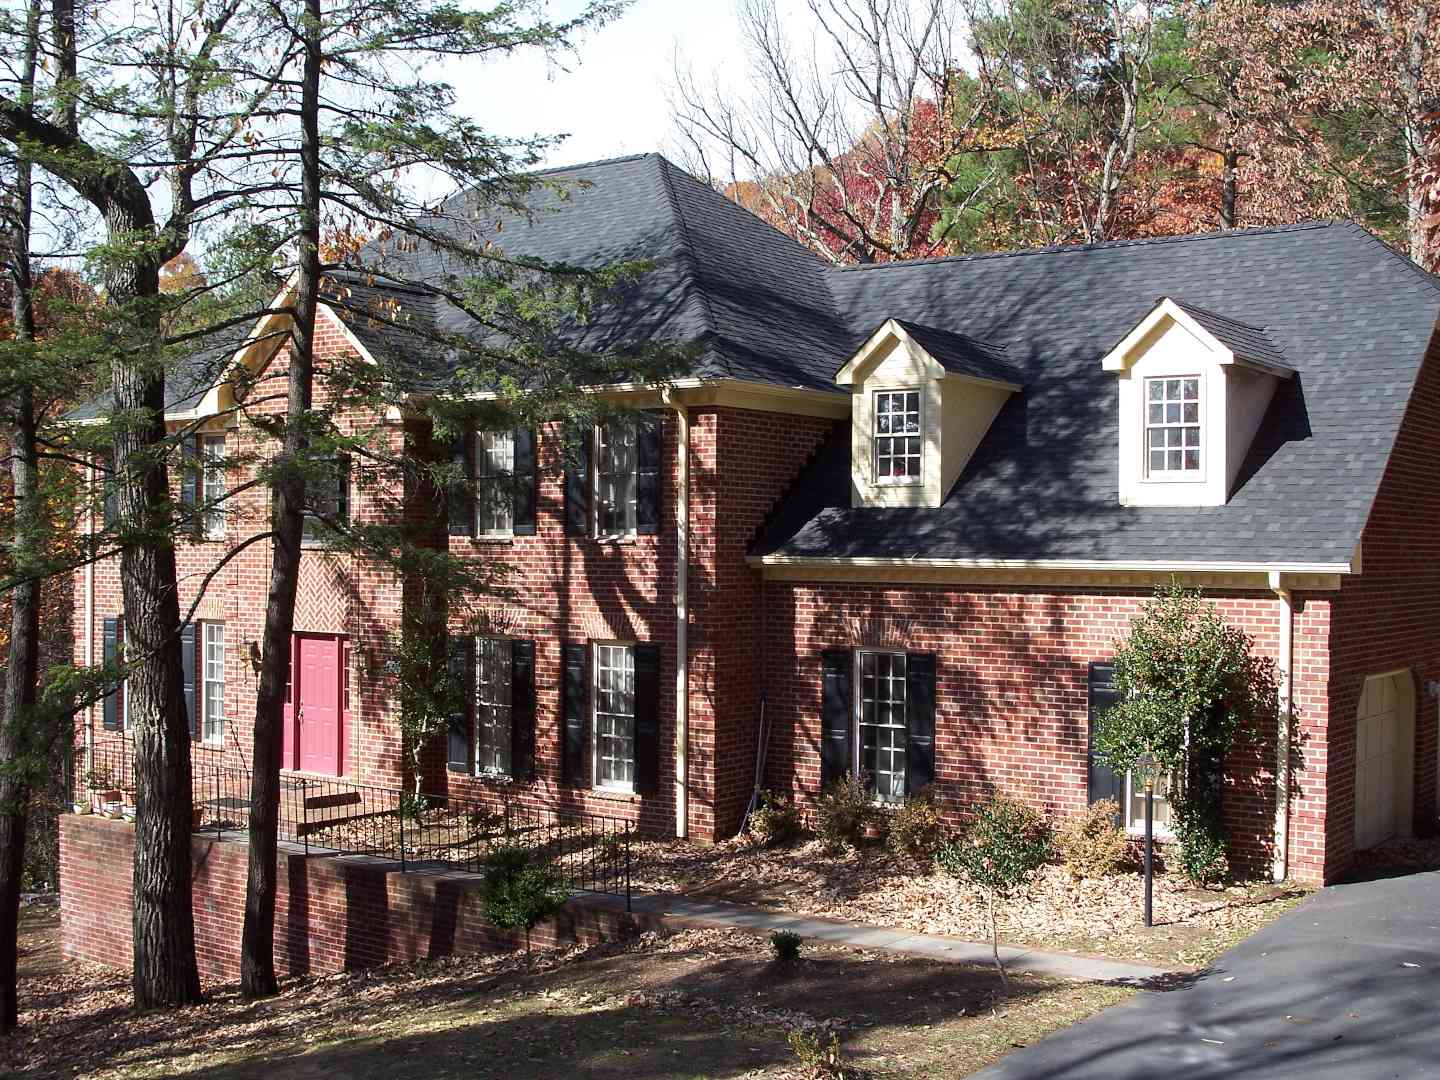 A beautiful brick home with a new roof